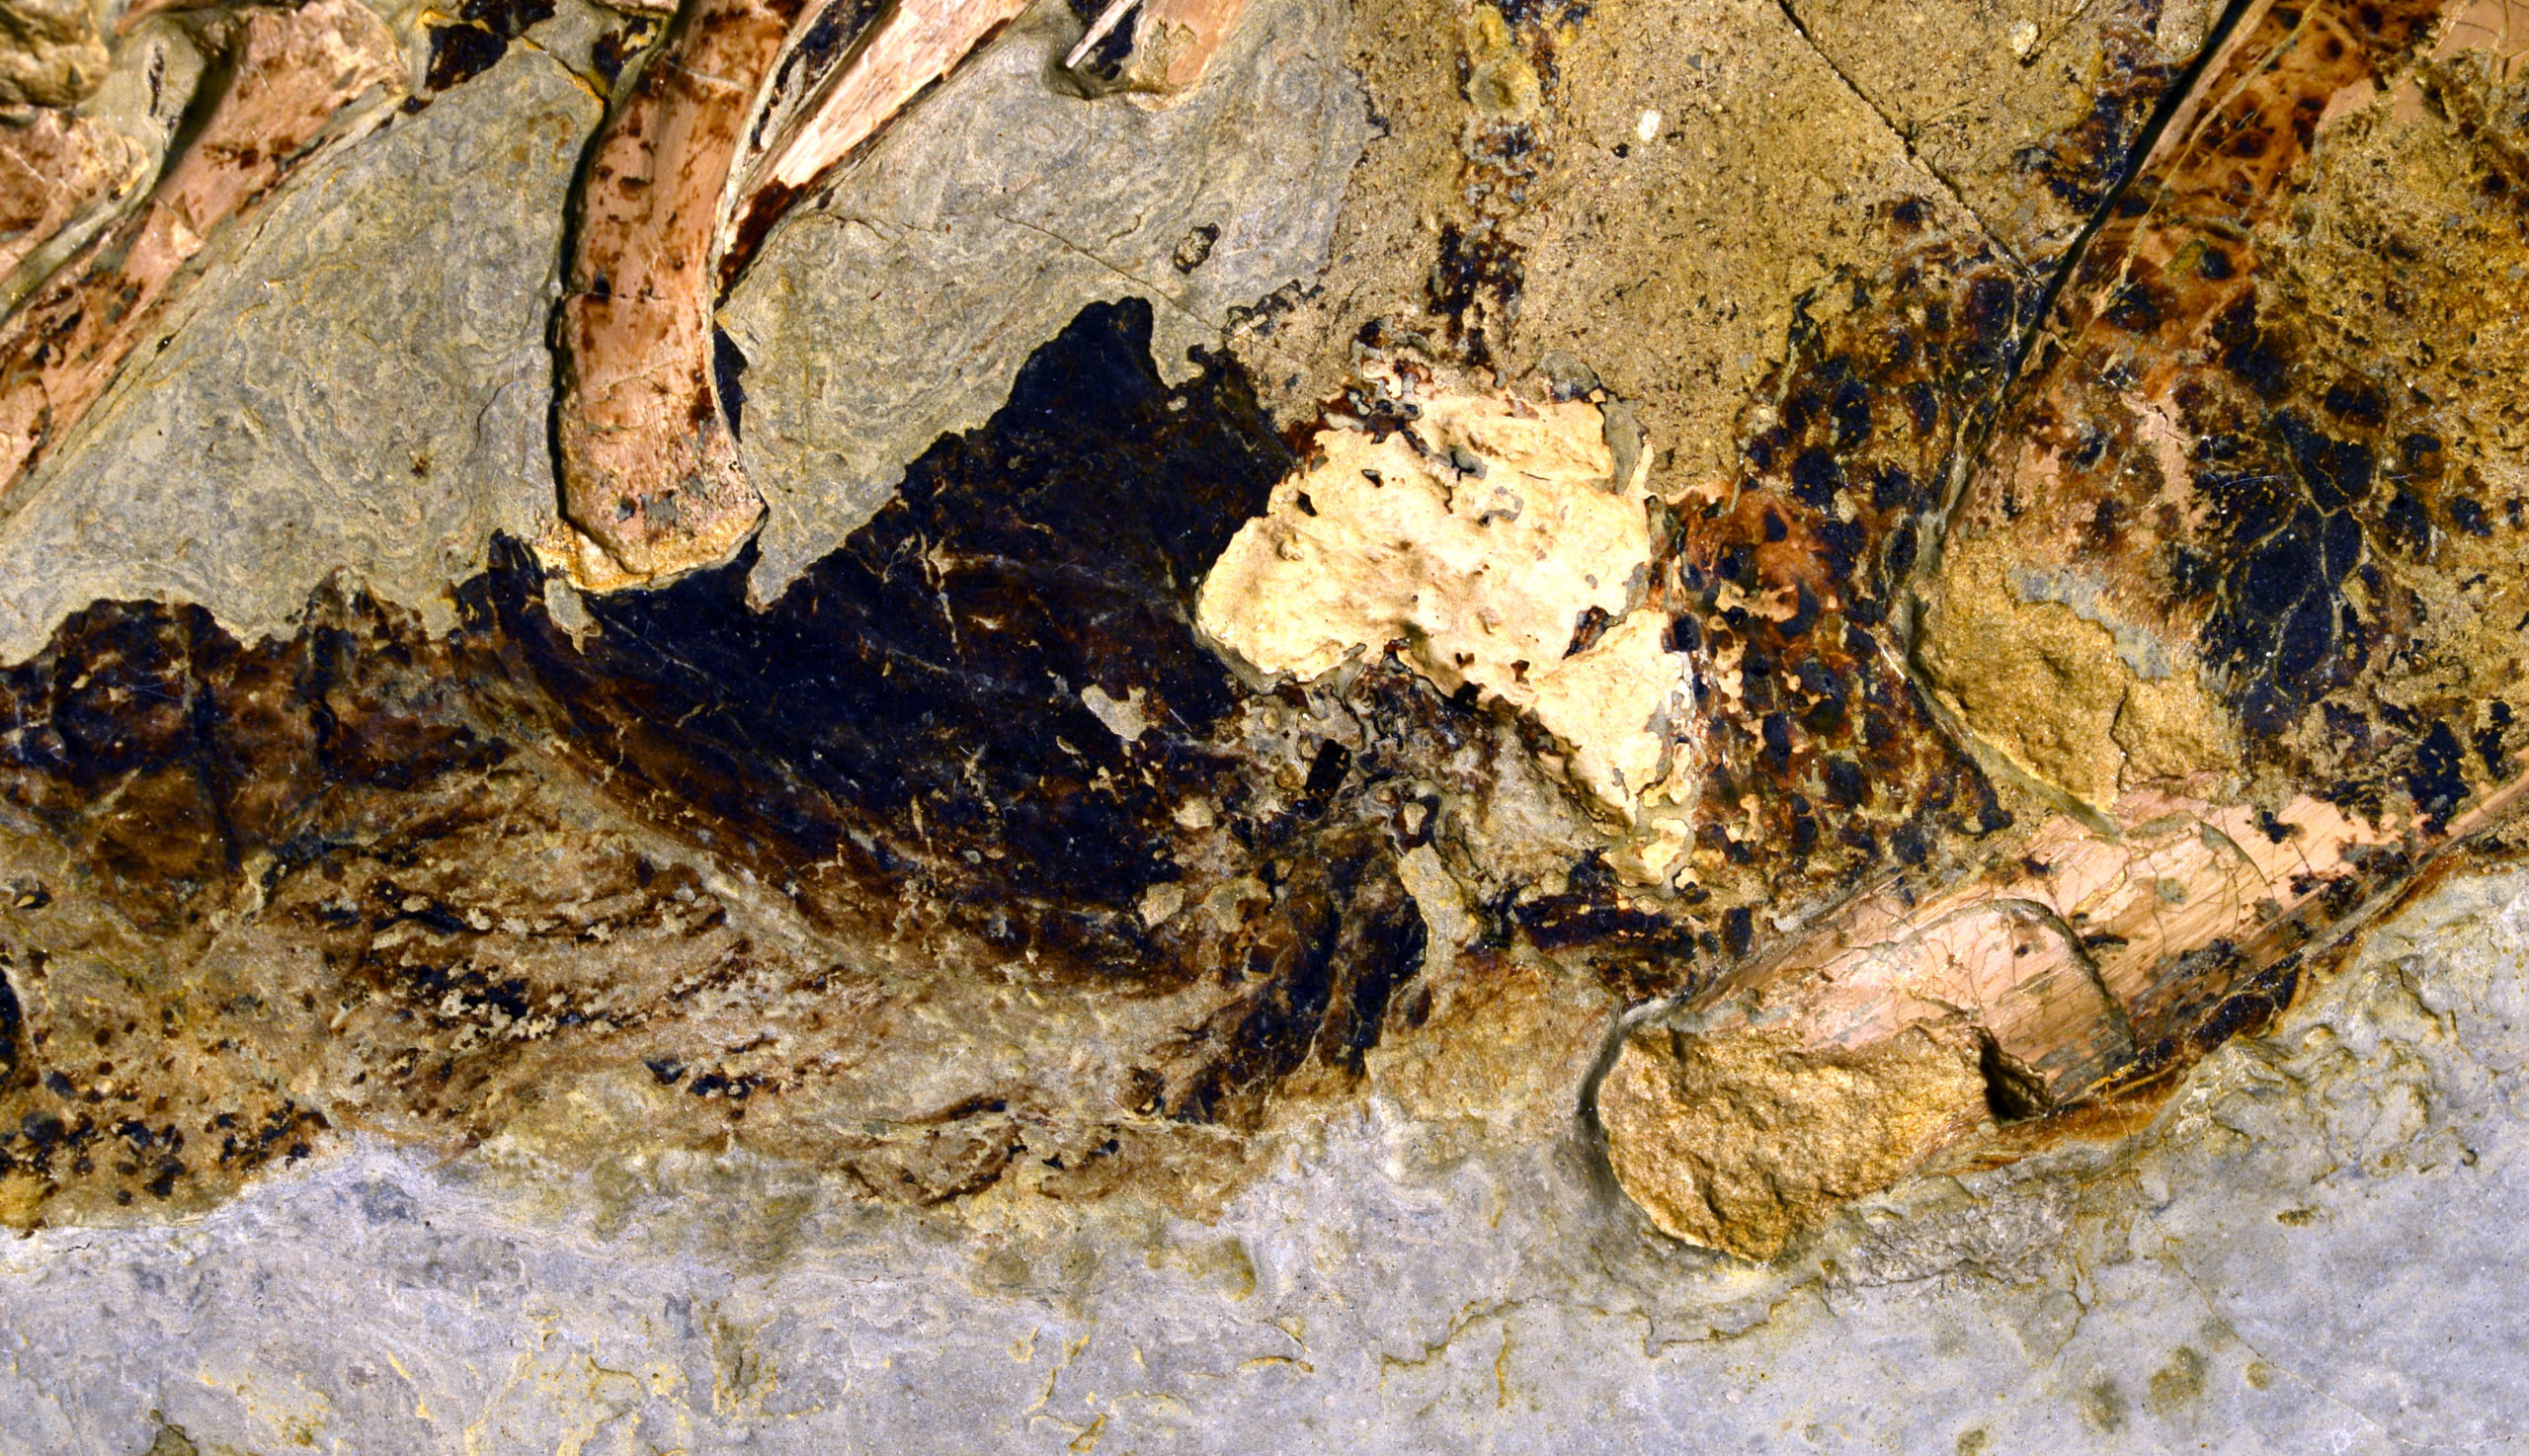 A close-up of the cloaca, within an off-white coprolite at centre. (Image: Jakob Vinther)